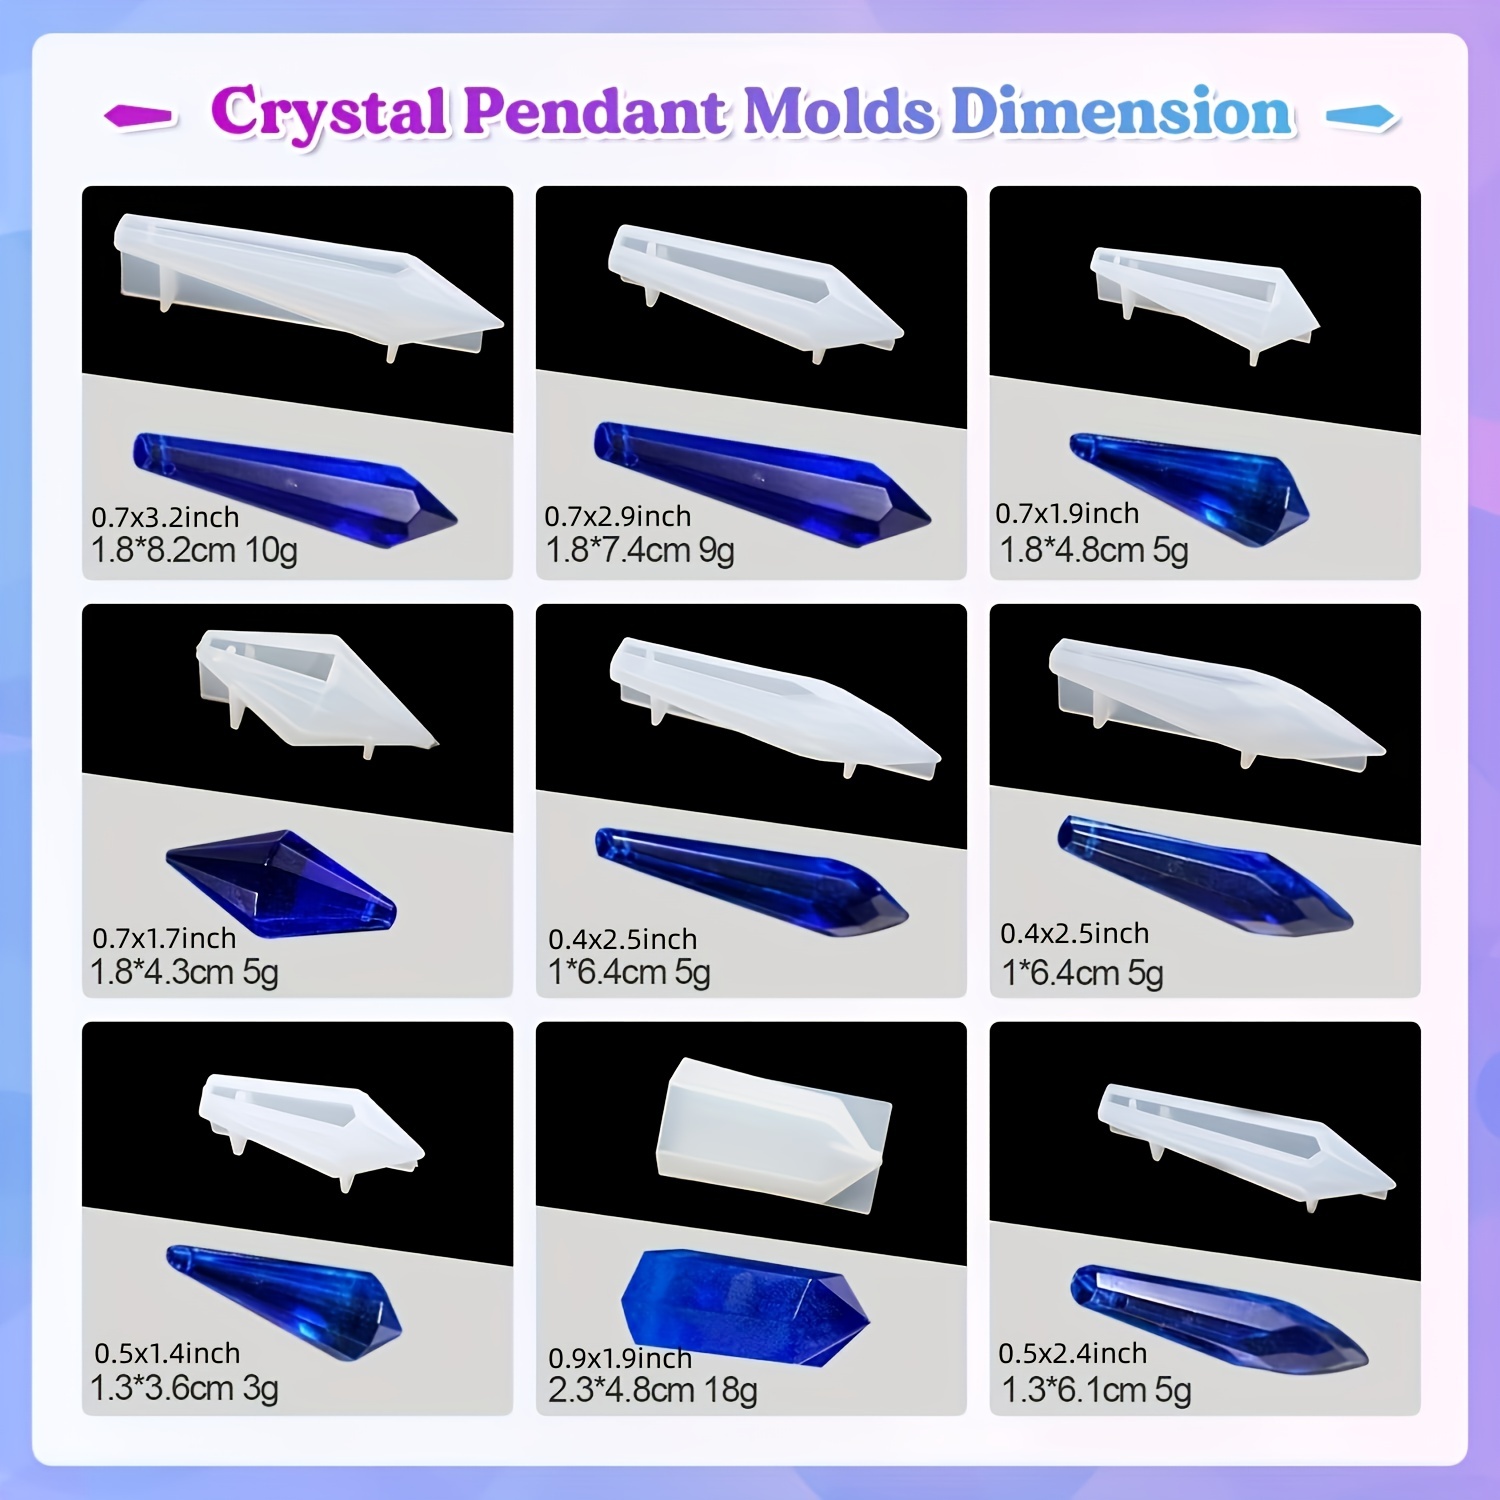 Resin Epoxy Molds 3D Pendulum Crystal Molds for Resin,silicone Molds for  Resin Casting,multi-facet Gemstone Resin Jewelry Molds 